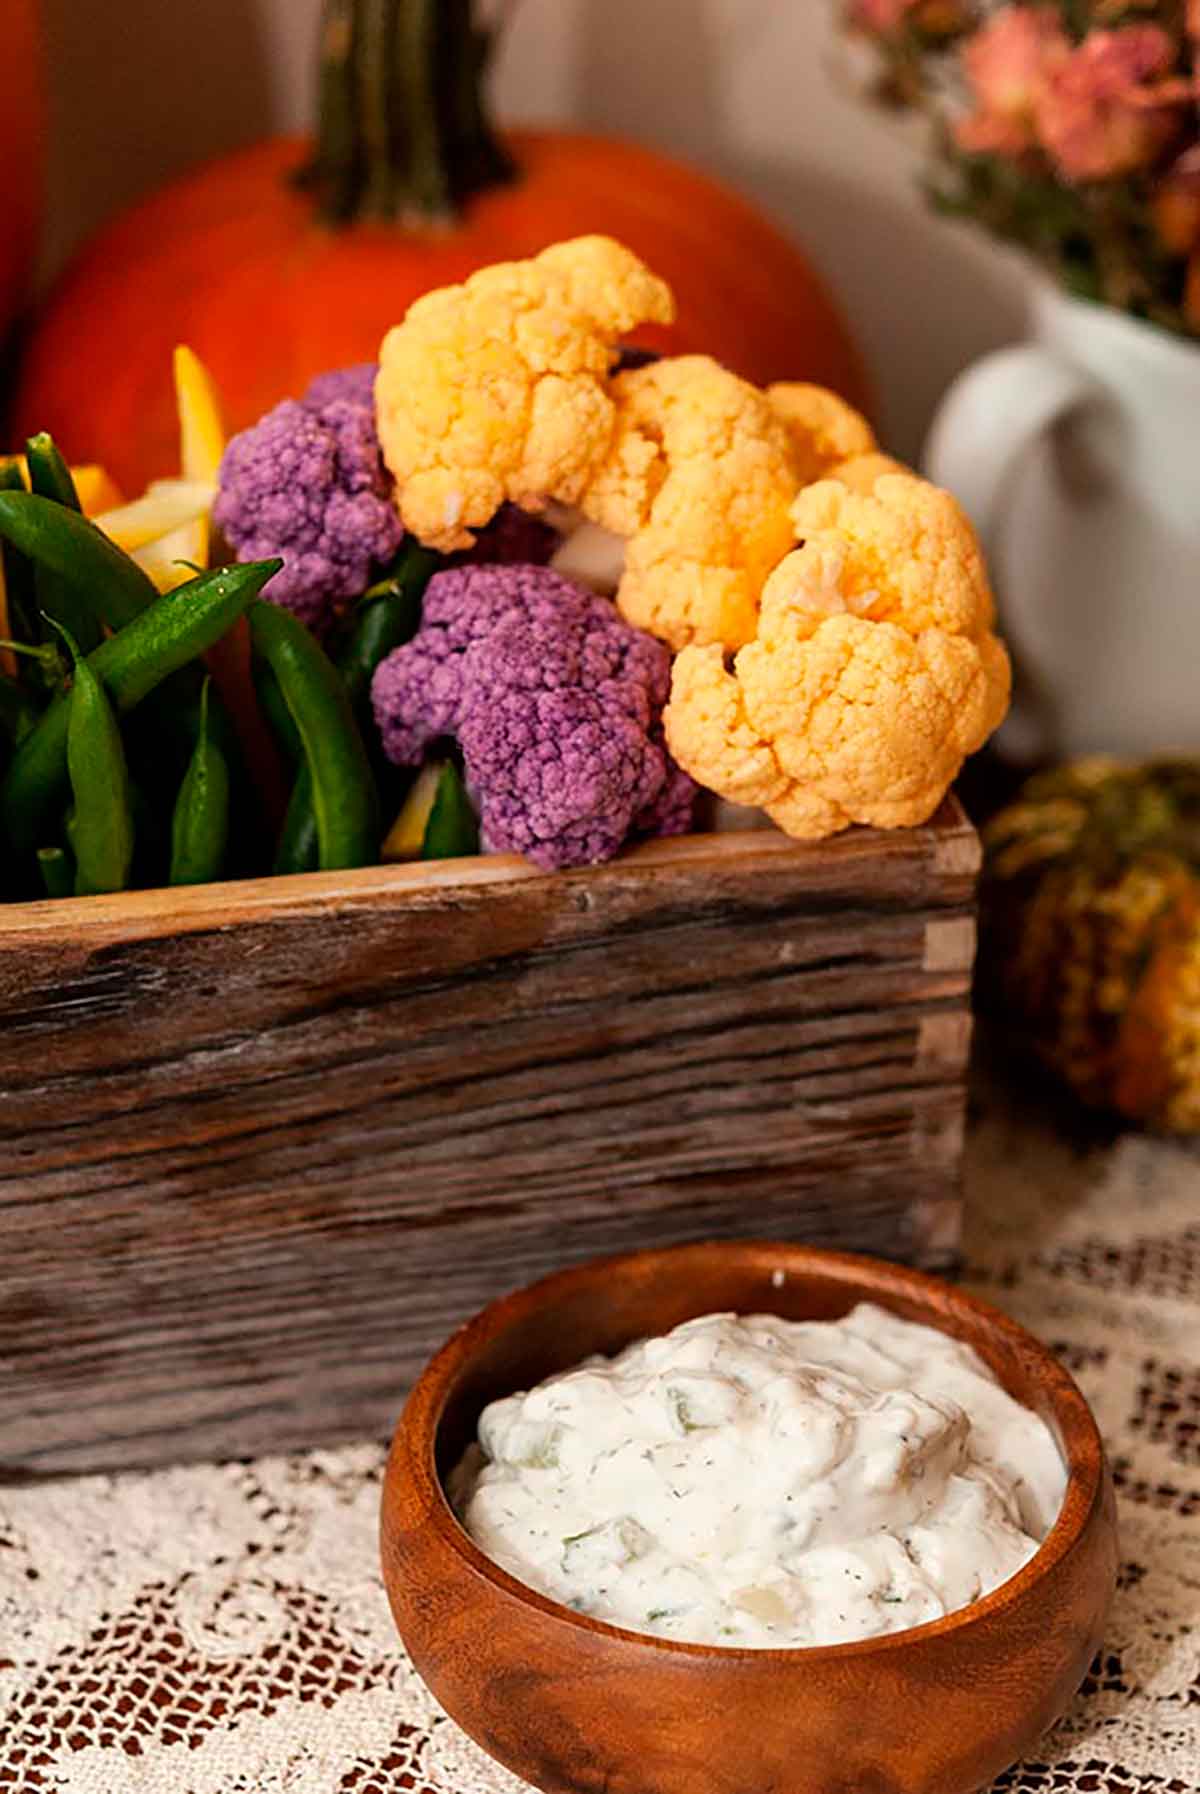 A small wooden bowl of vegetable dip in front of a flower box full of vegetables.